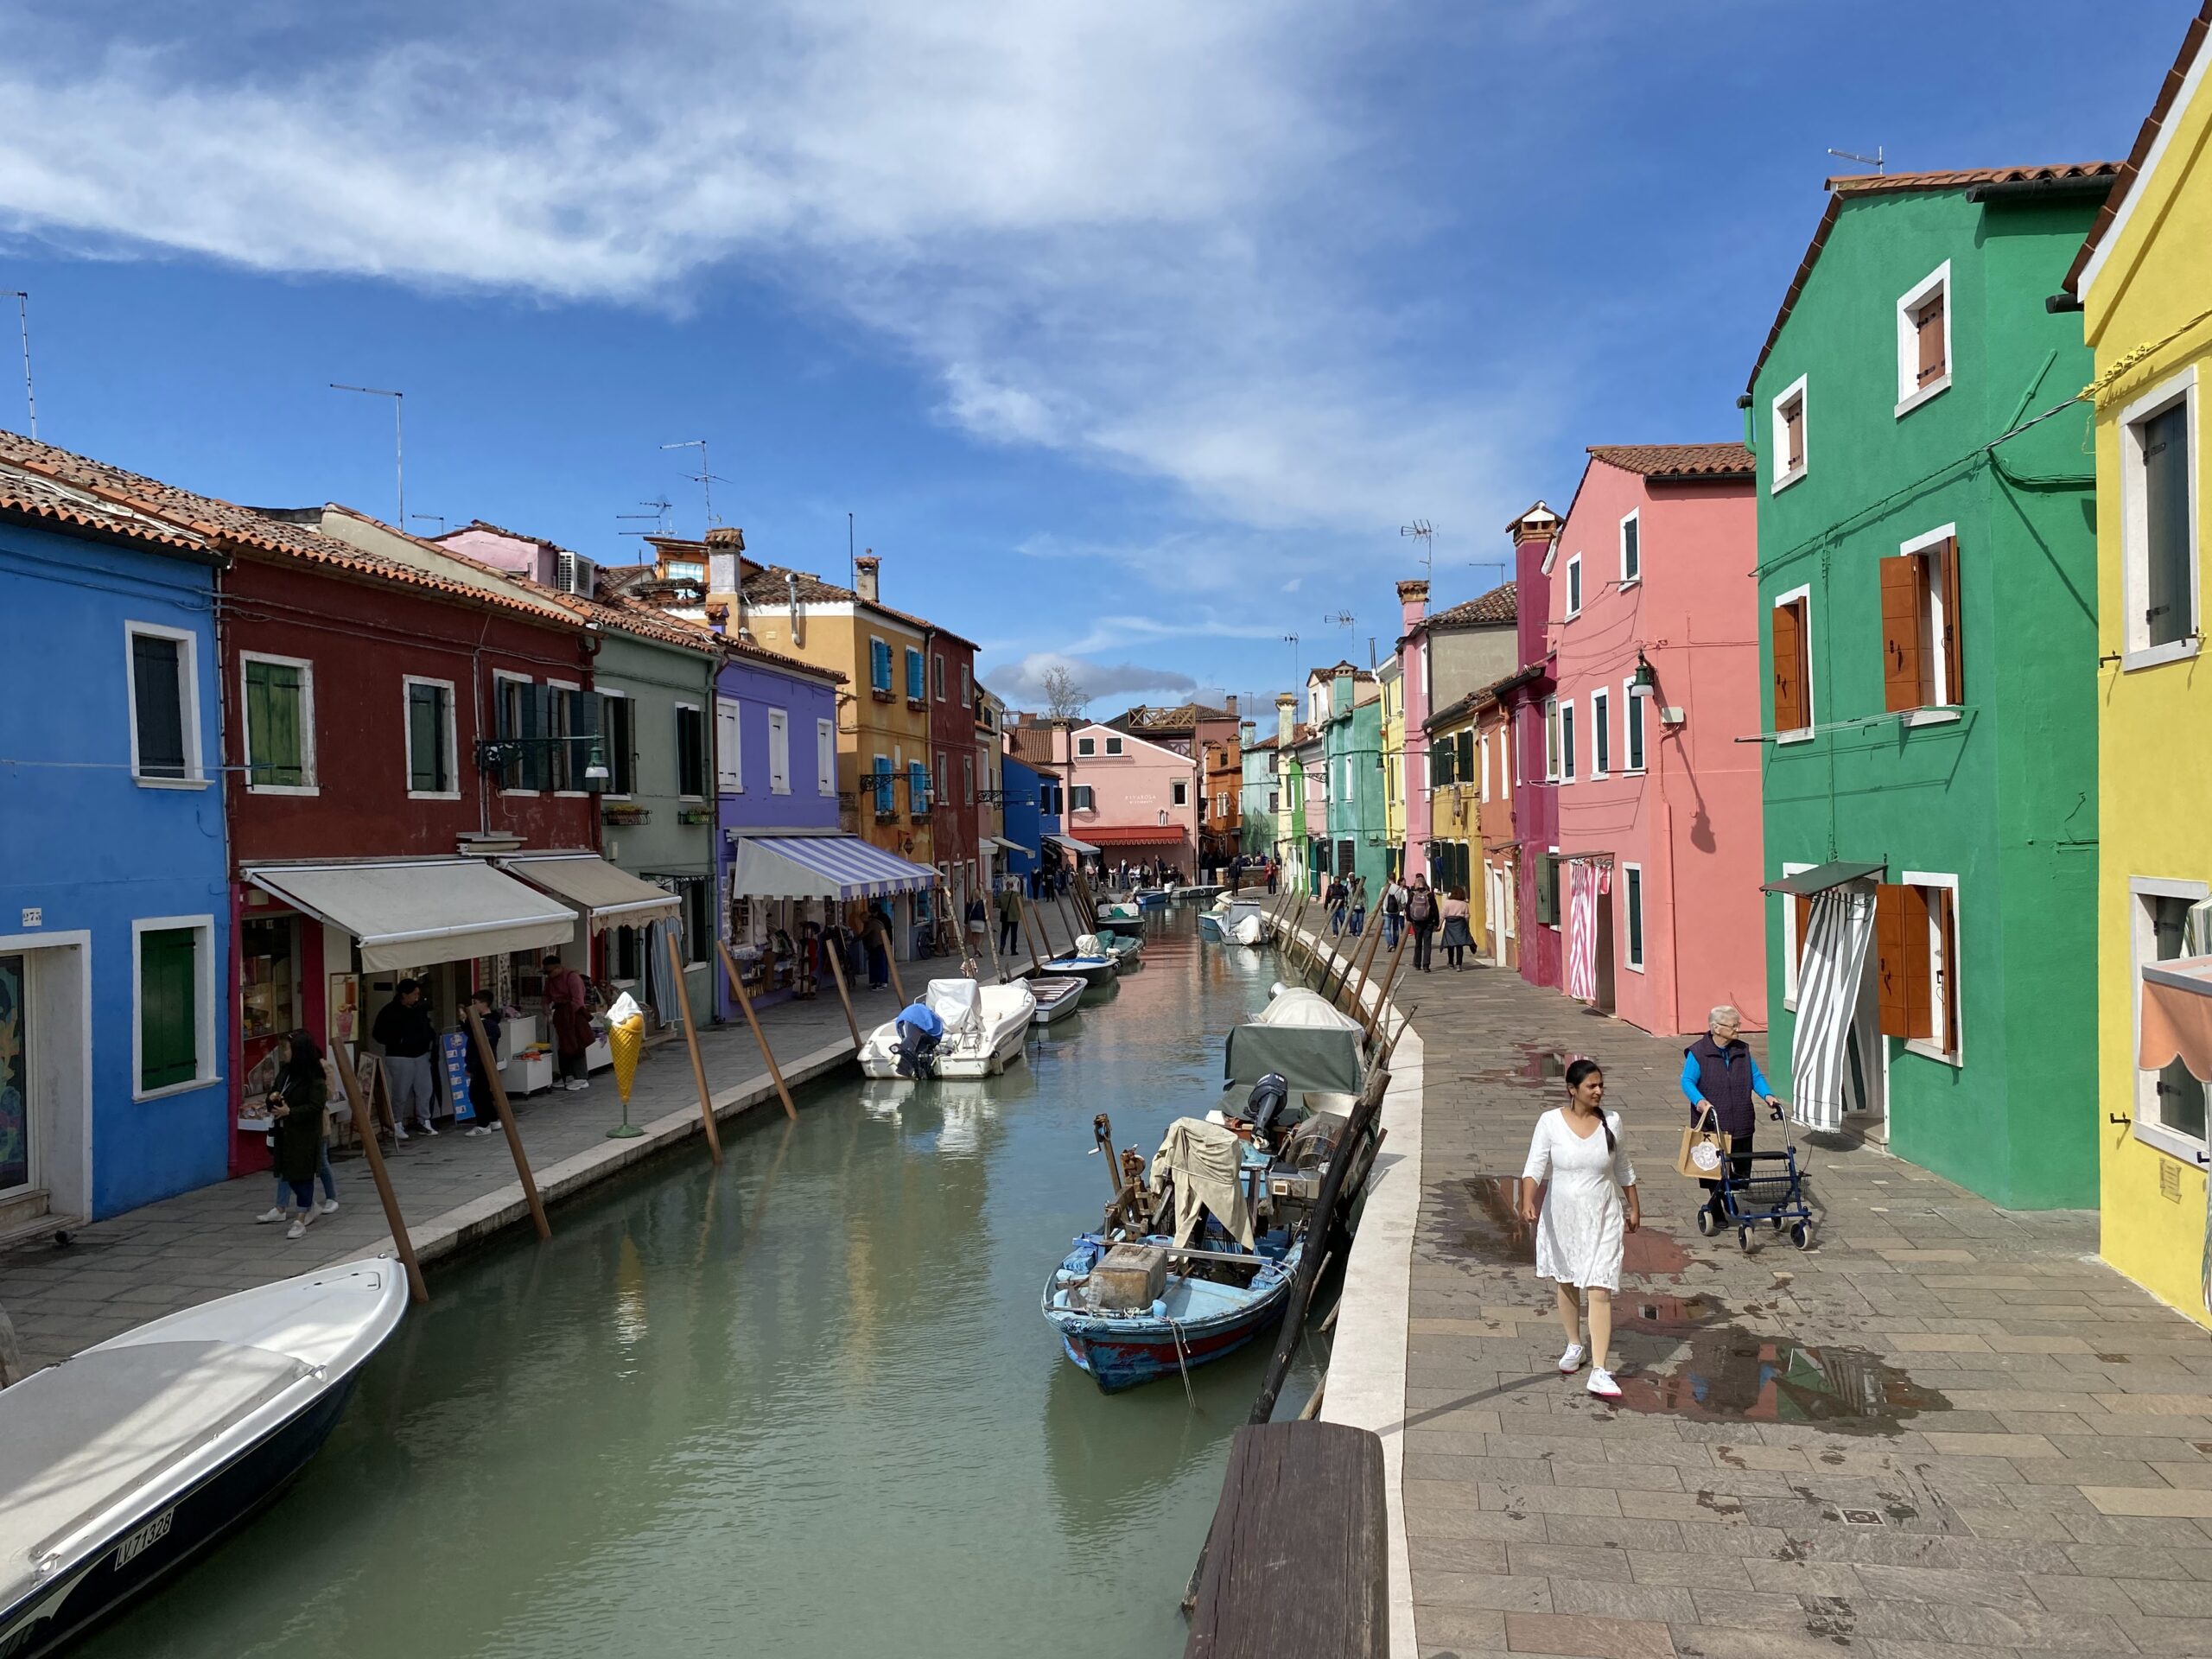 Murano, Burano, and Torcello in a day